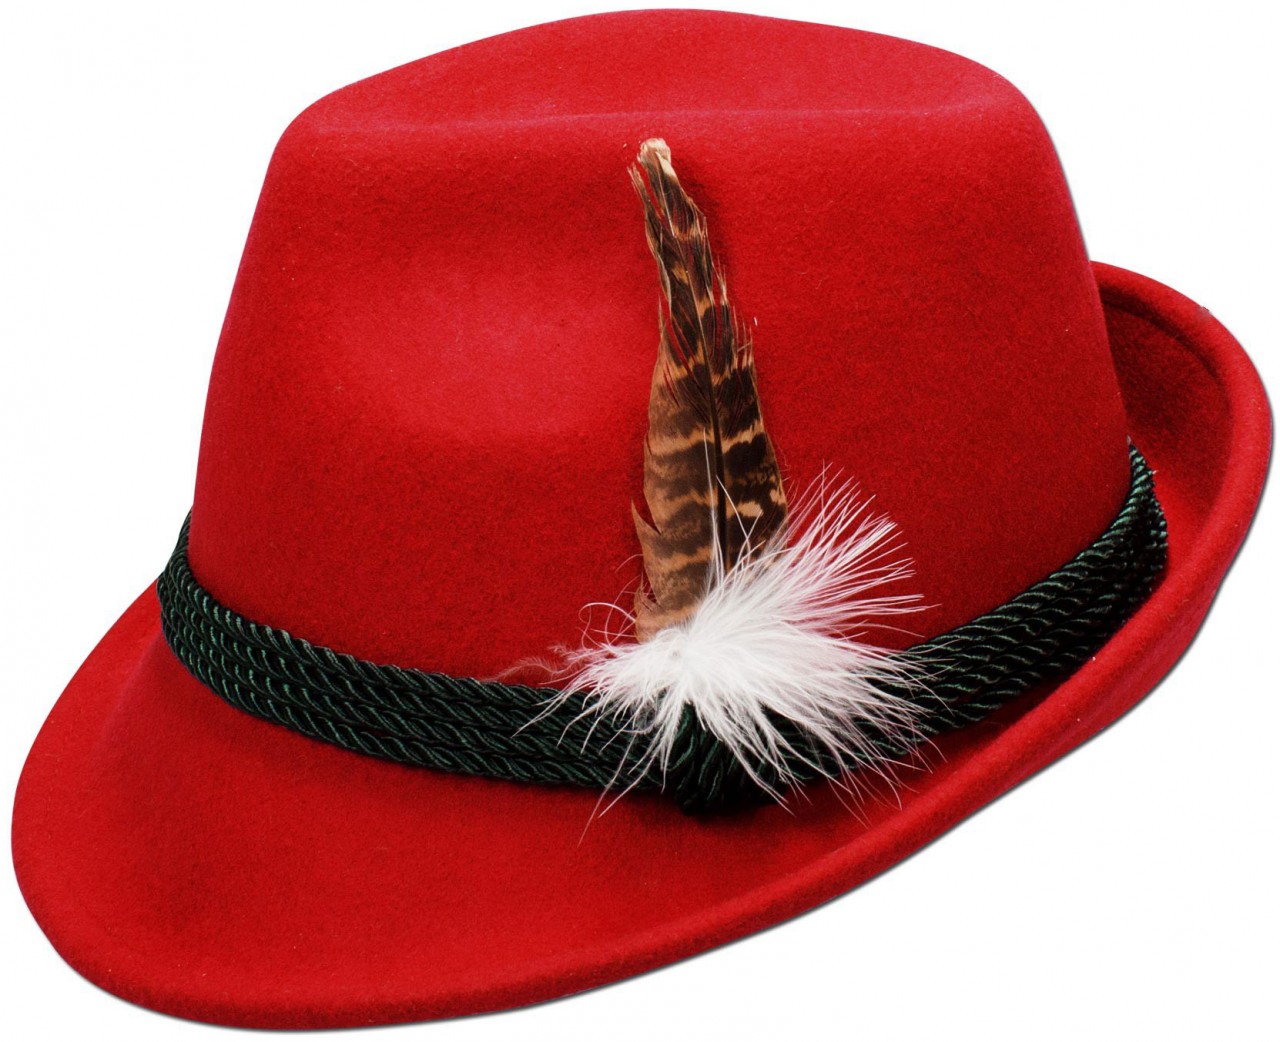 Trachten Felt Hat with Feather, Red